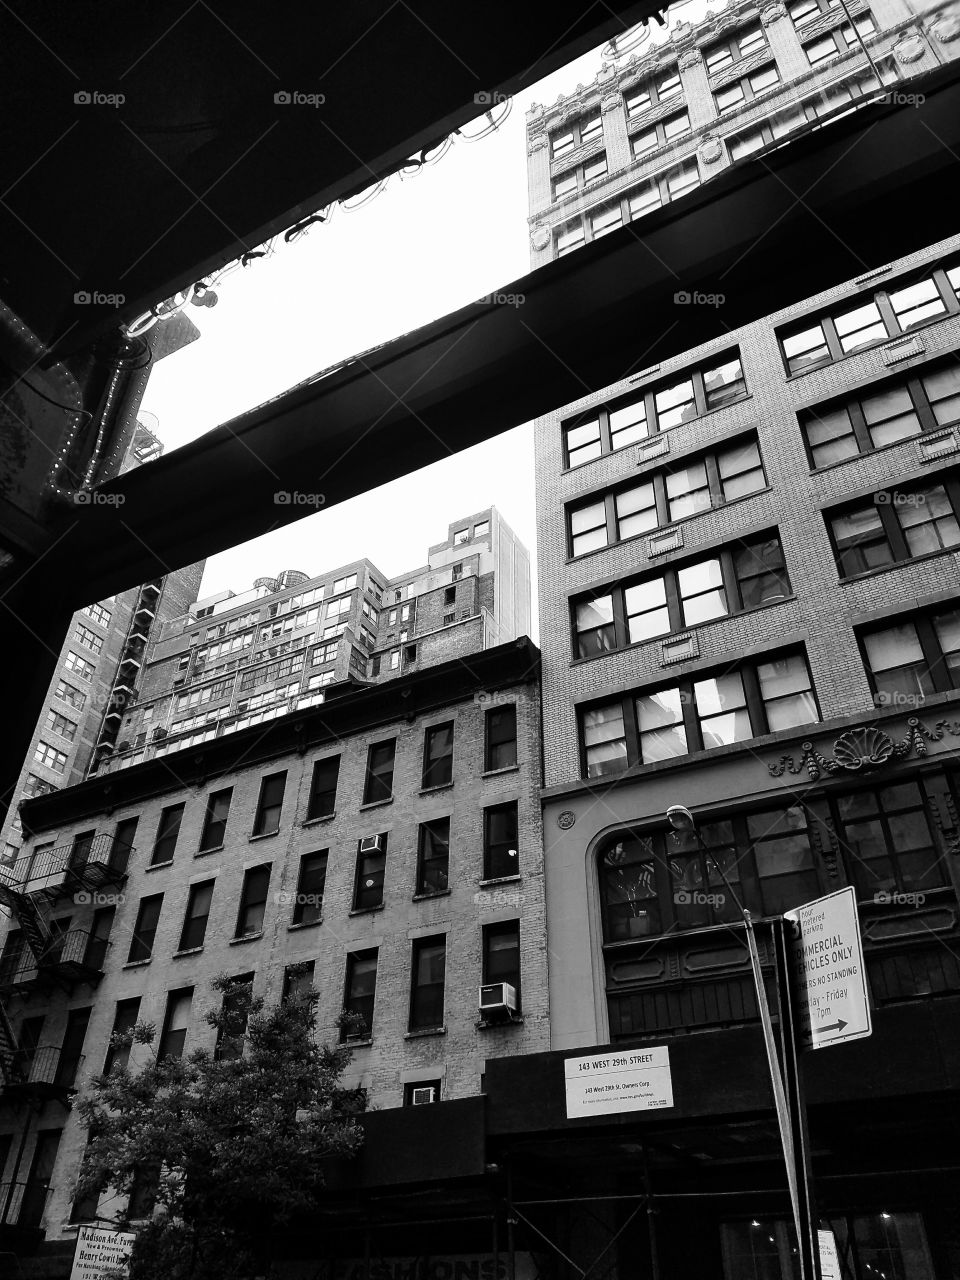 View from Pioneers Bar in Lower Manhattan - 29th between 6th and 7th - in Black and White - May 12th 2017